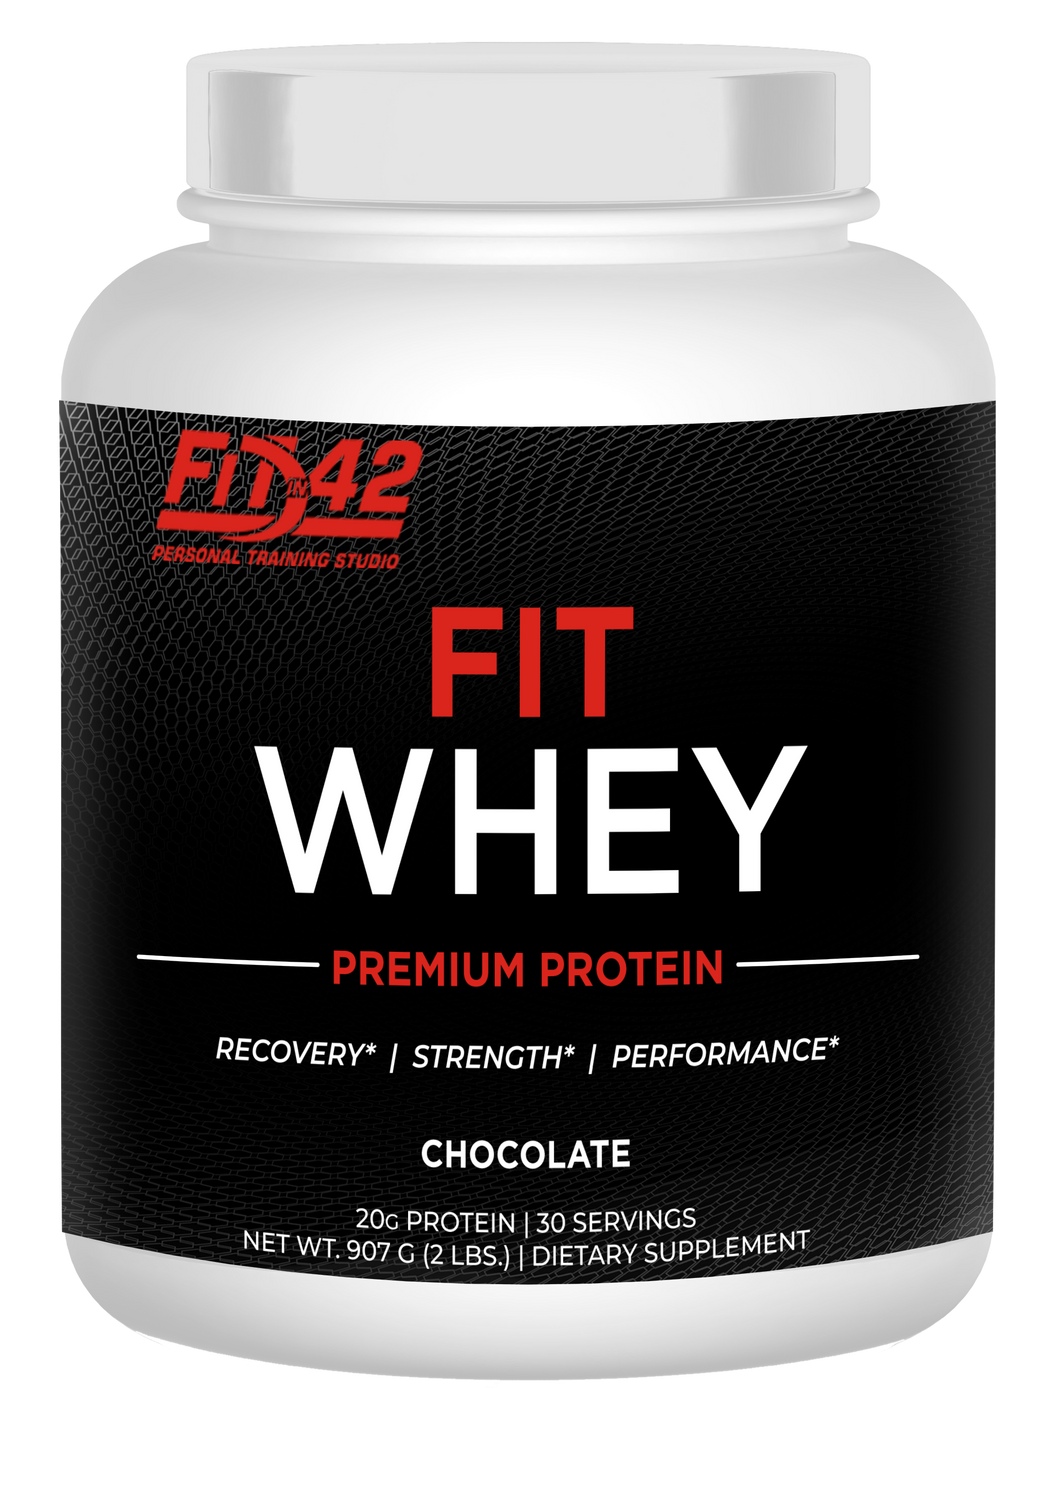 Fit Whey Protein